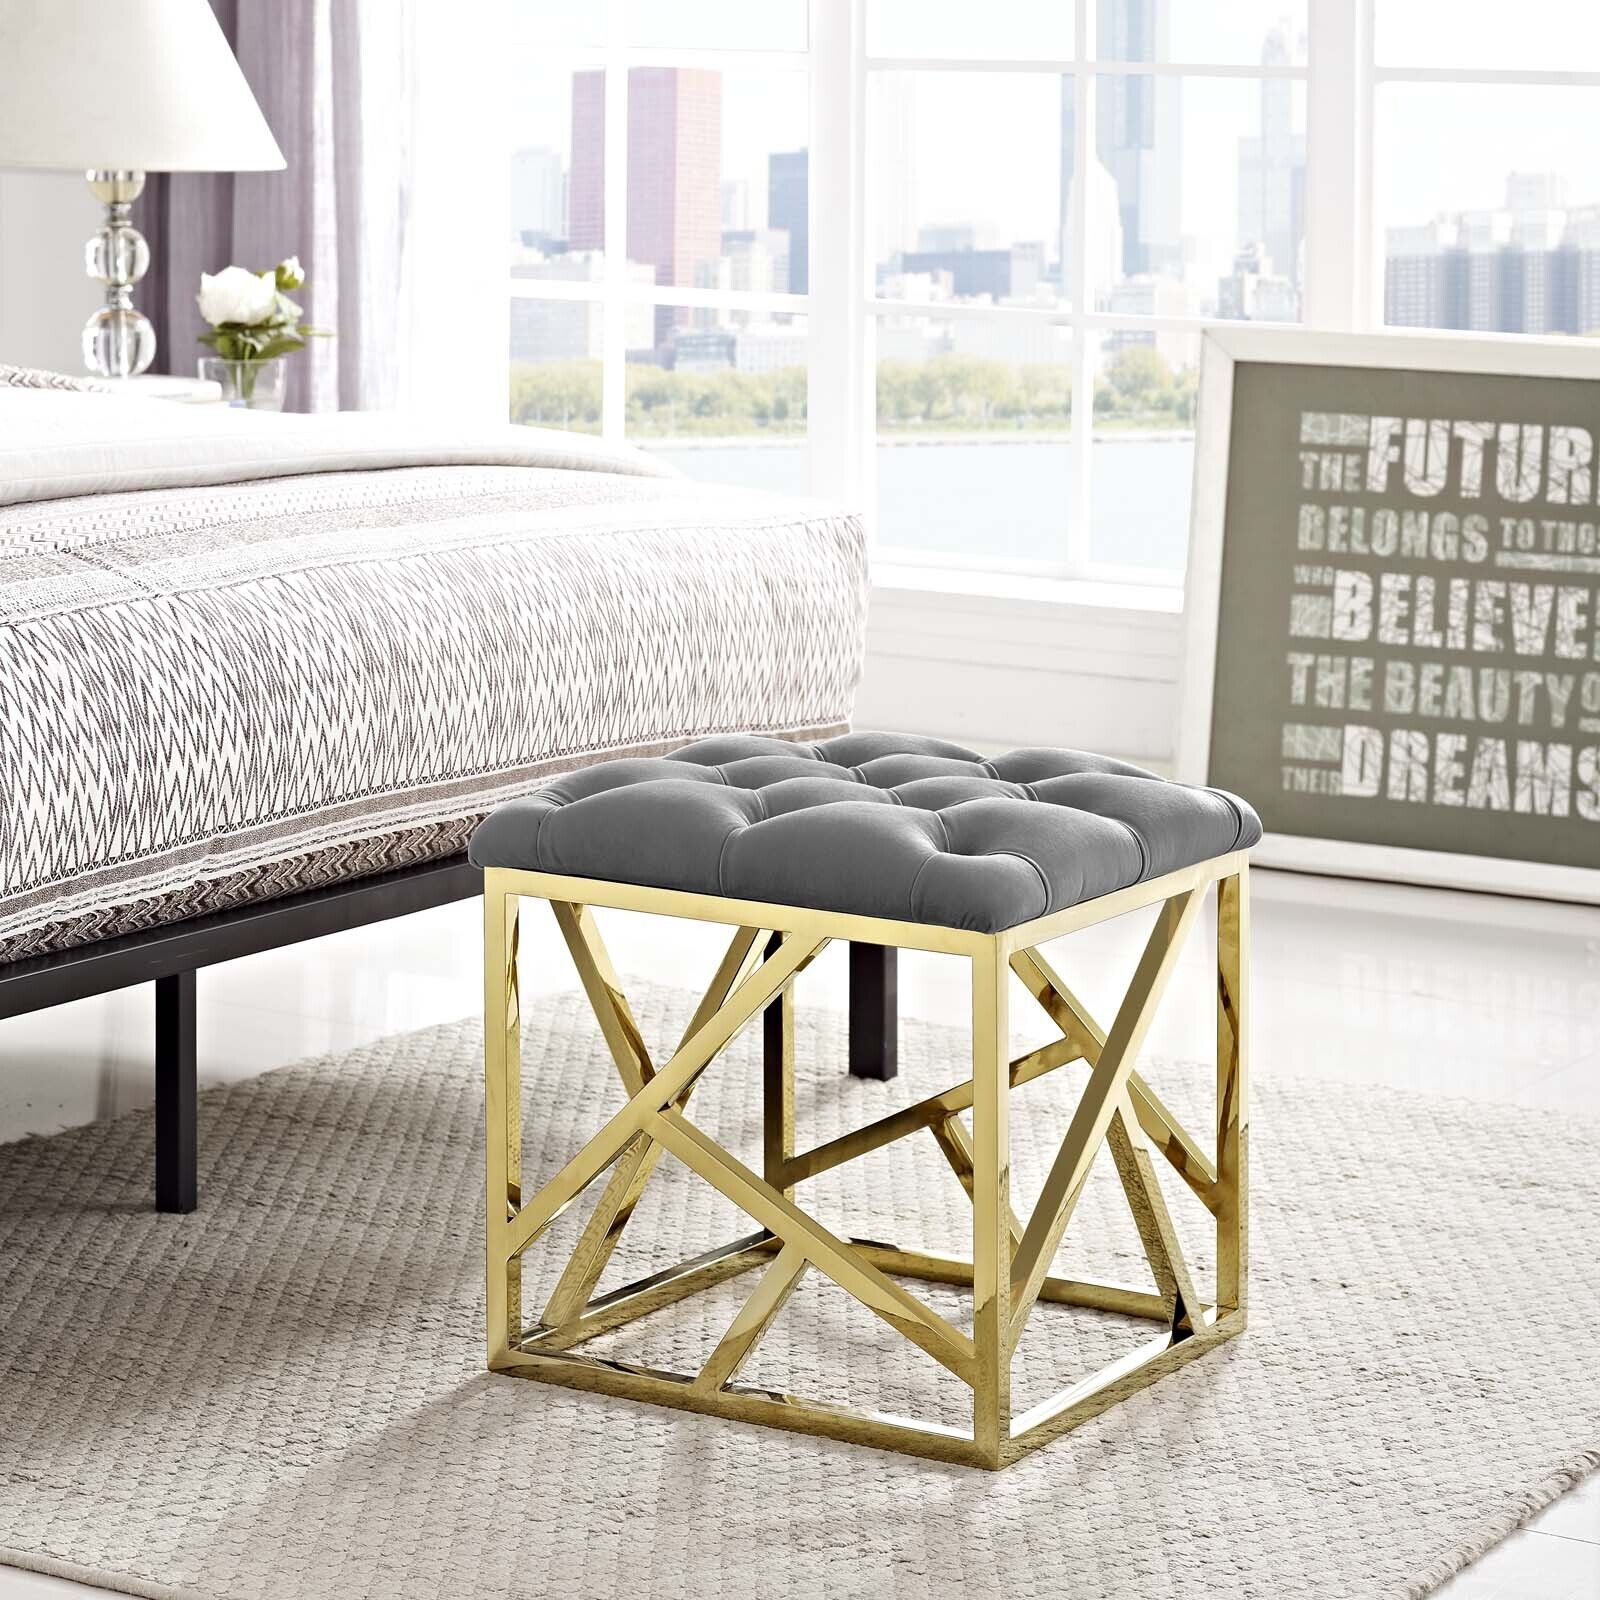 Contemporary Modern Tufted Velvet Geometric Metal Ottoman Bench In Gold Gray  | Ebay With Geometric Gray Ottomans (View 12 of 15)